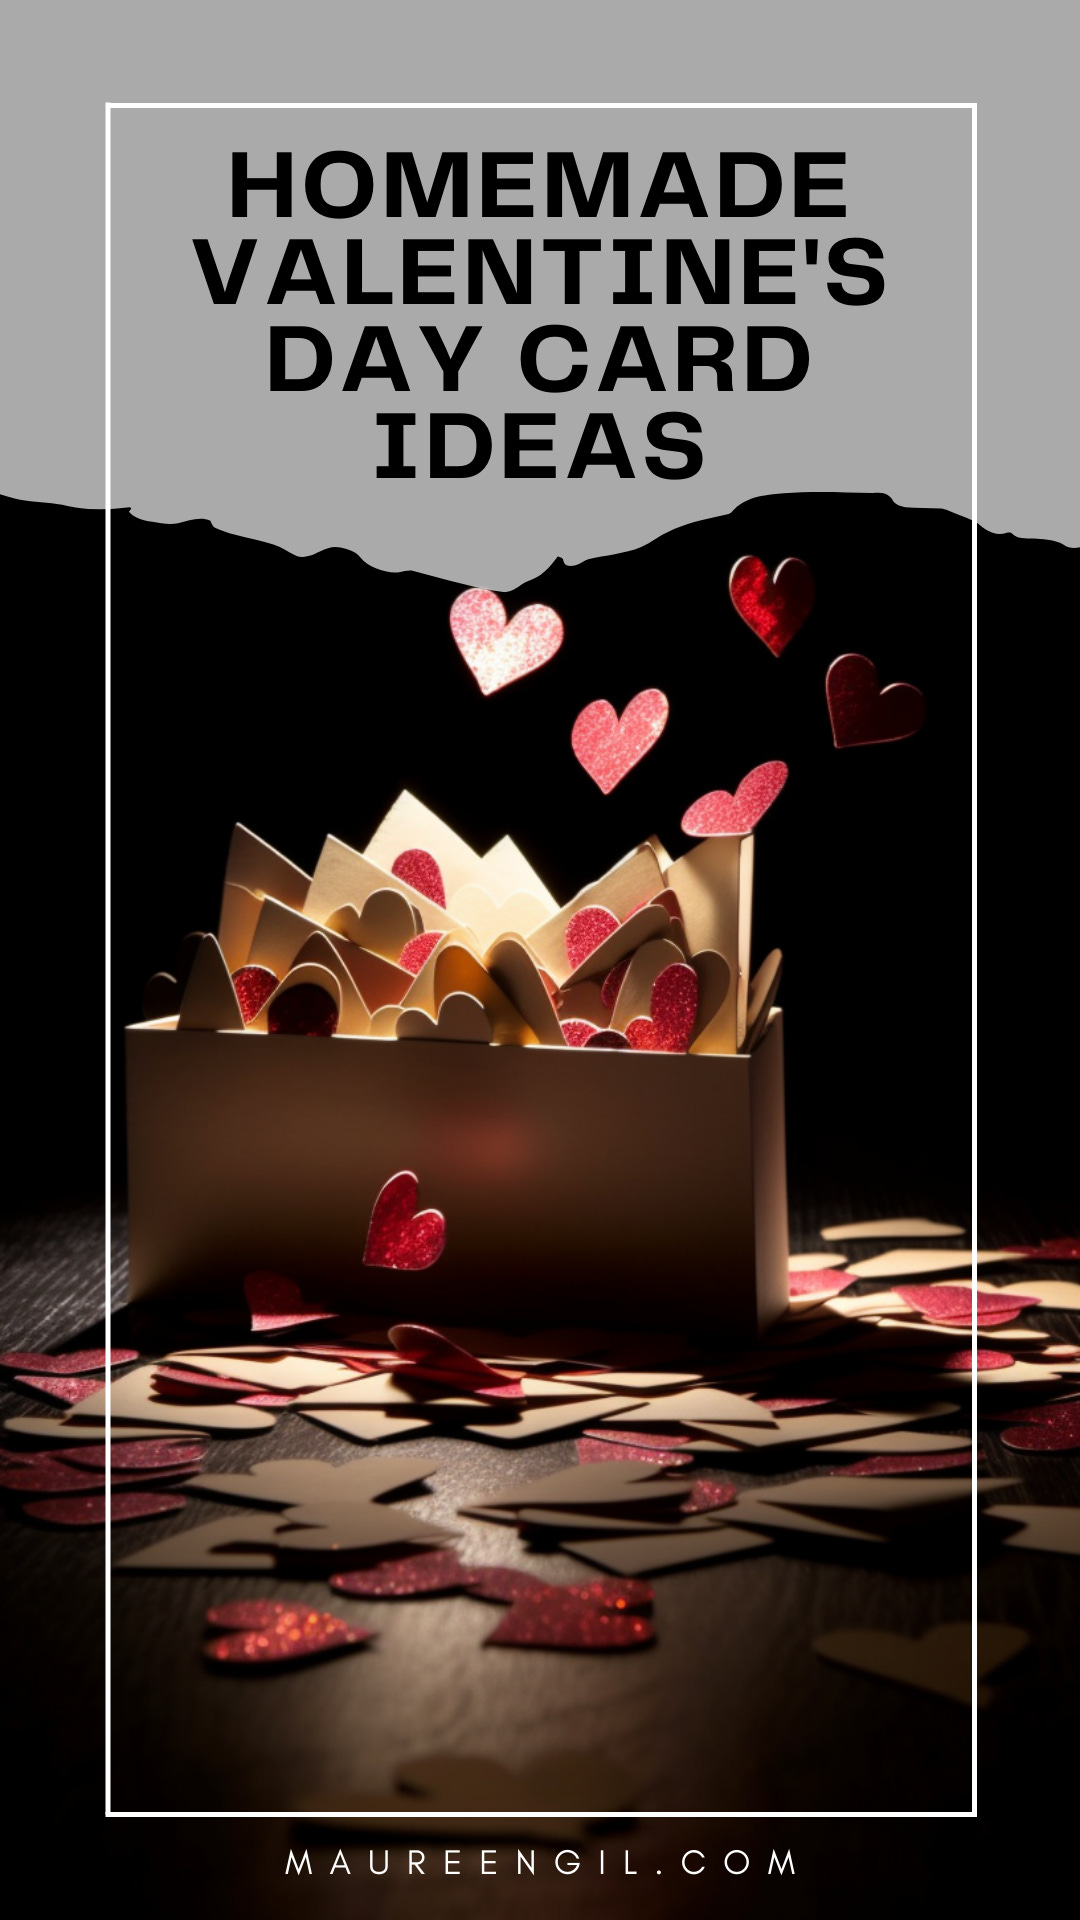 Today, I decided to remind all of my readers that tomorrow is Valentine’s Day. If you are like me, then you’re welcome. I just saved your marriage/relationship/it’s complicated. While we are at it, here is a list of homemade Valentine’s Day card ideas for you.